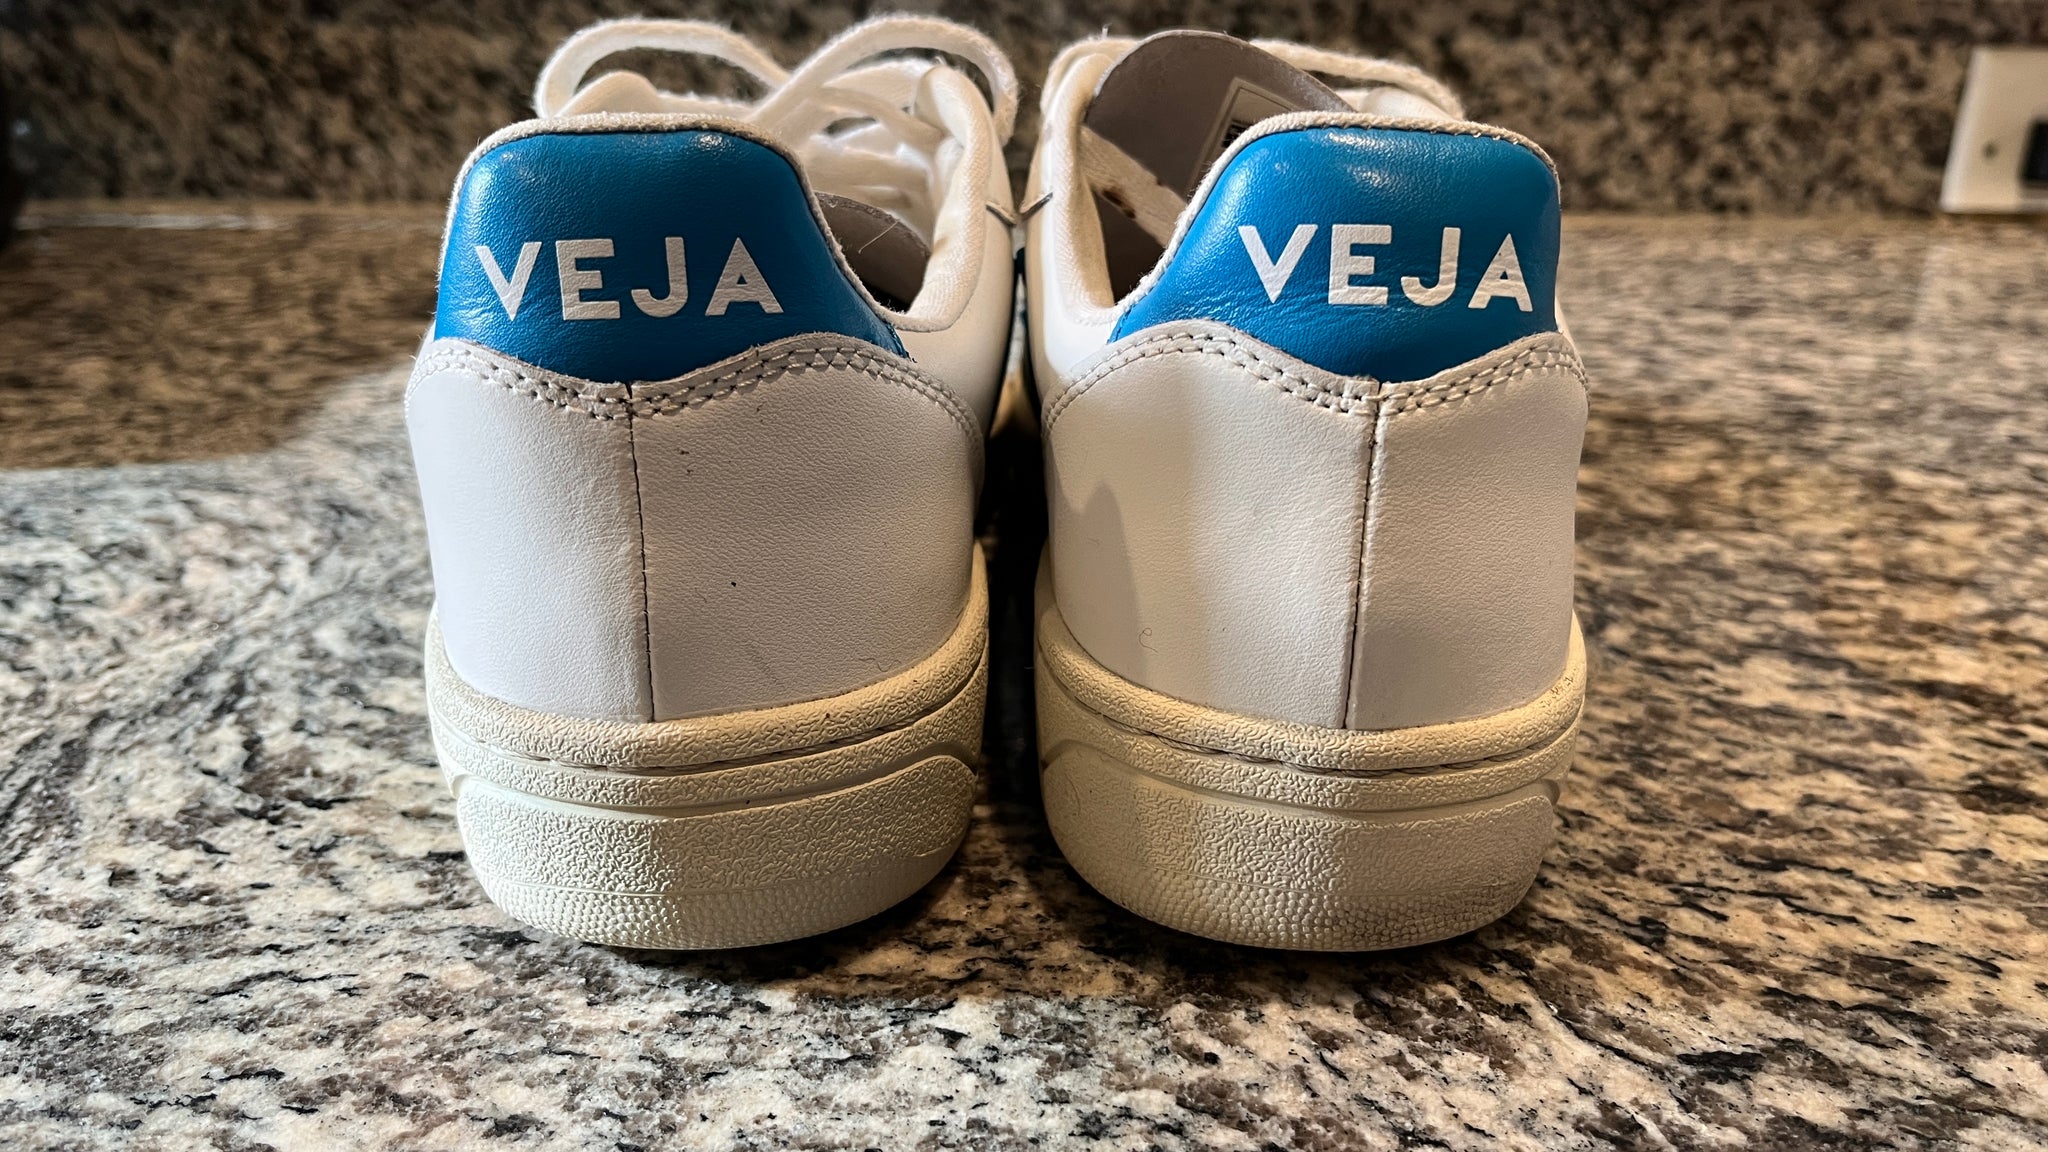 Veja 10th Anniversary Sneakers